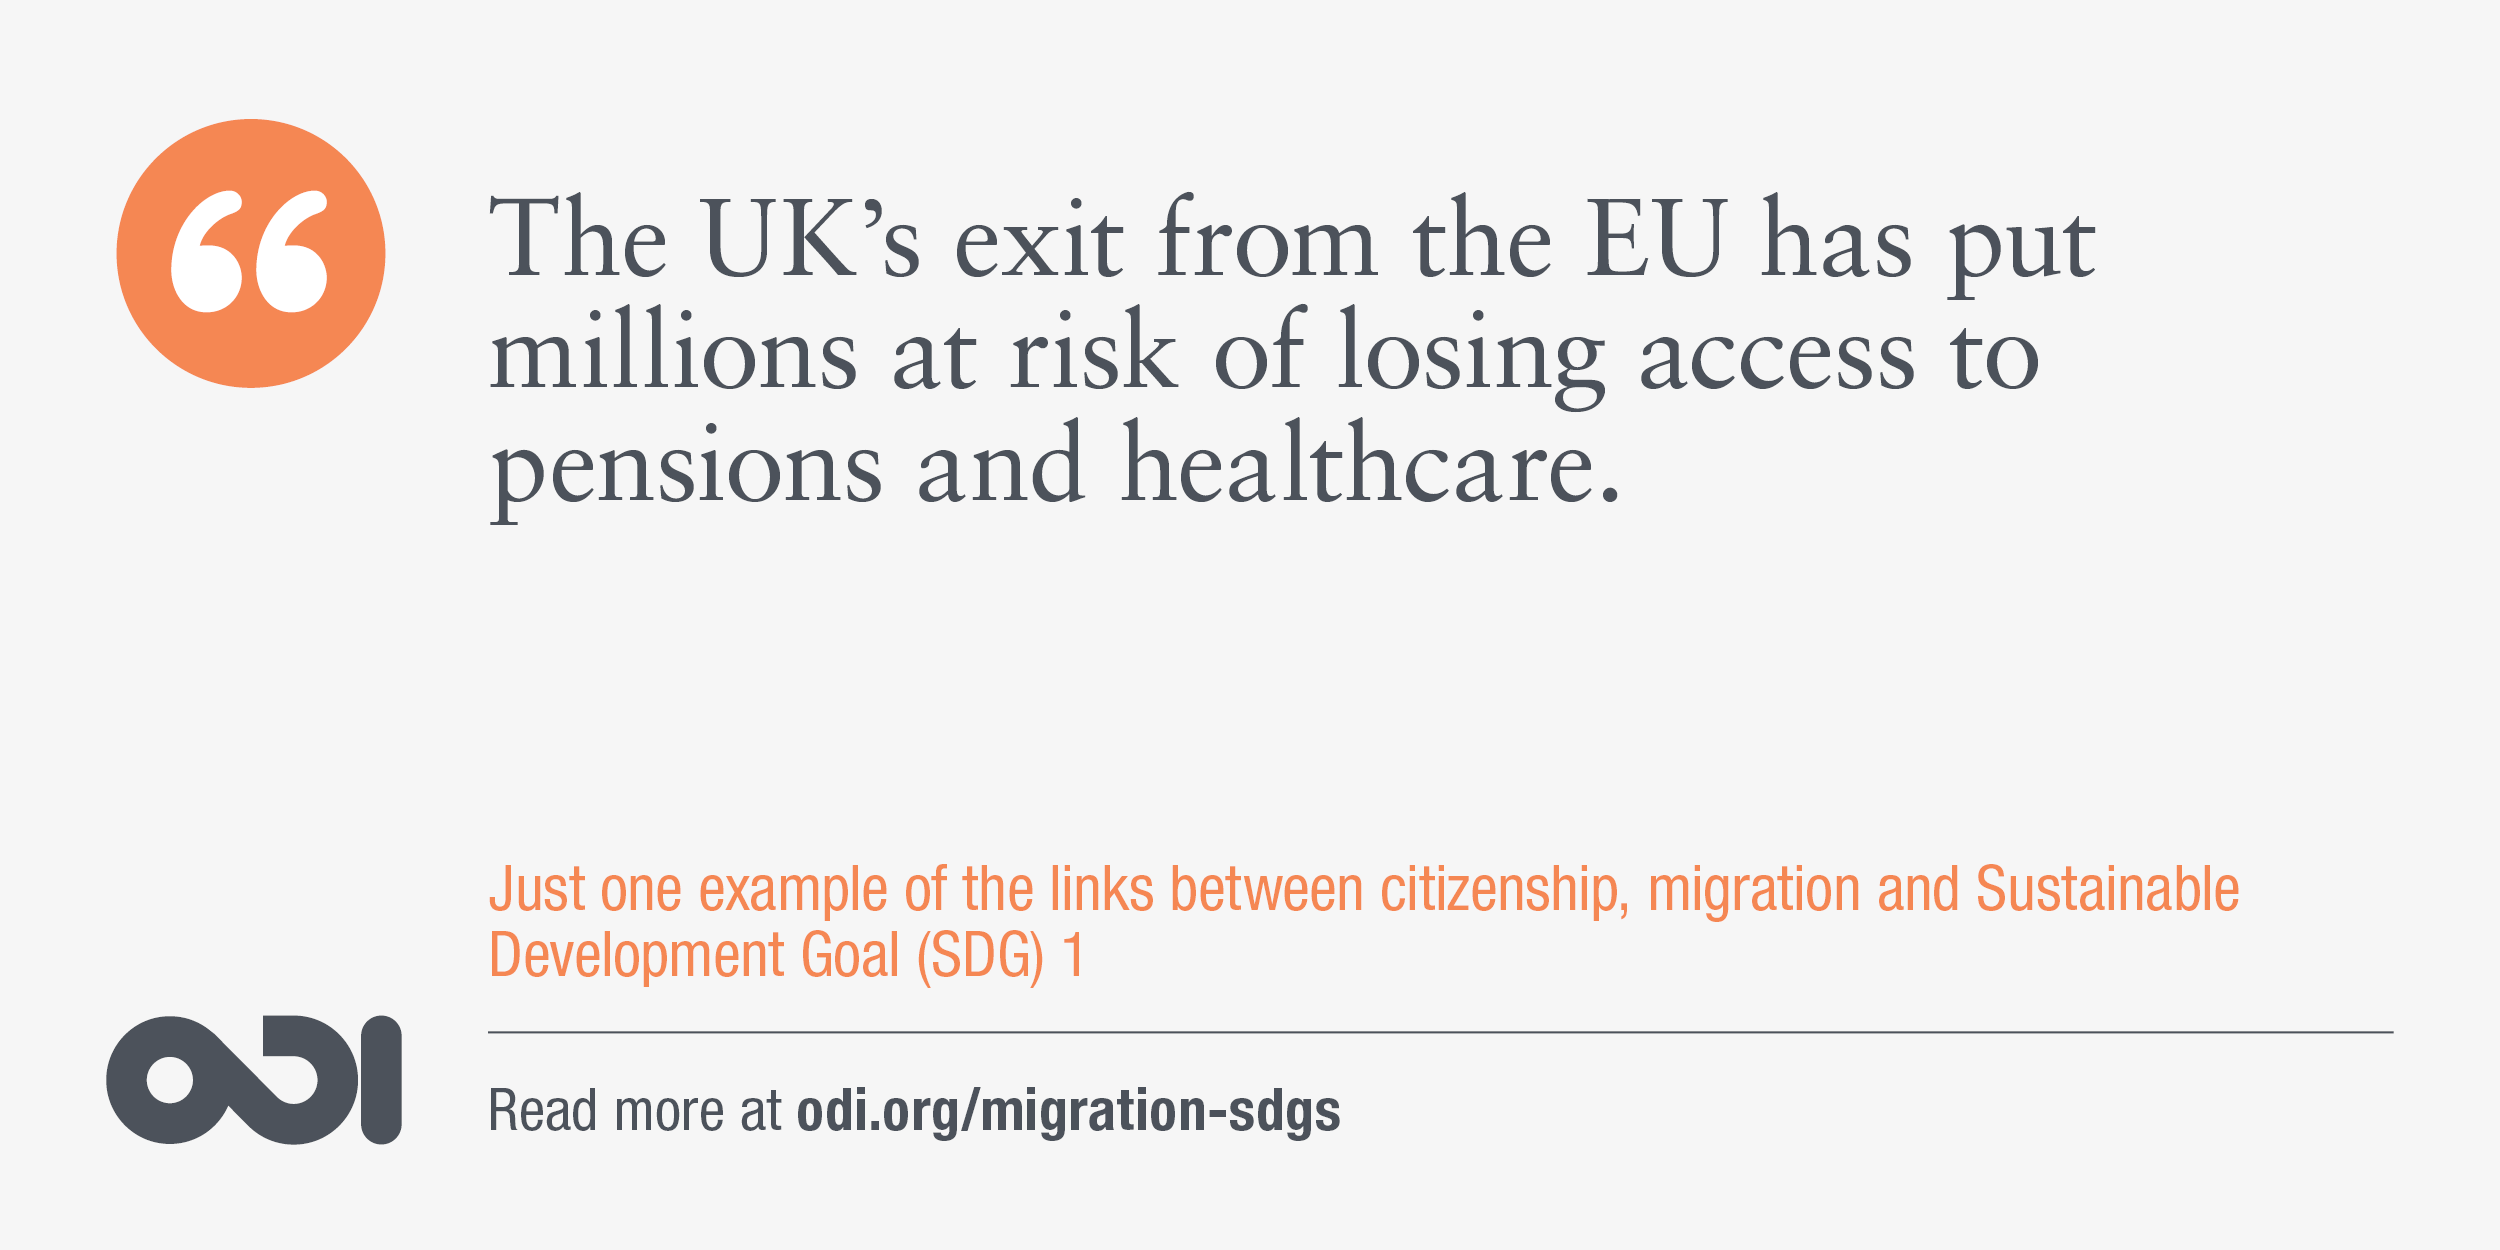 The links between citizenship, migration and SDG 1.